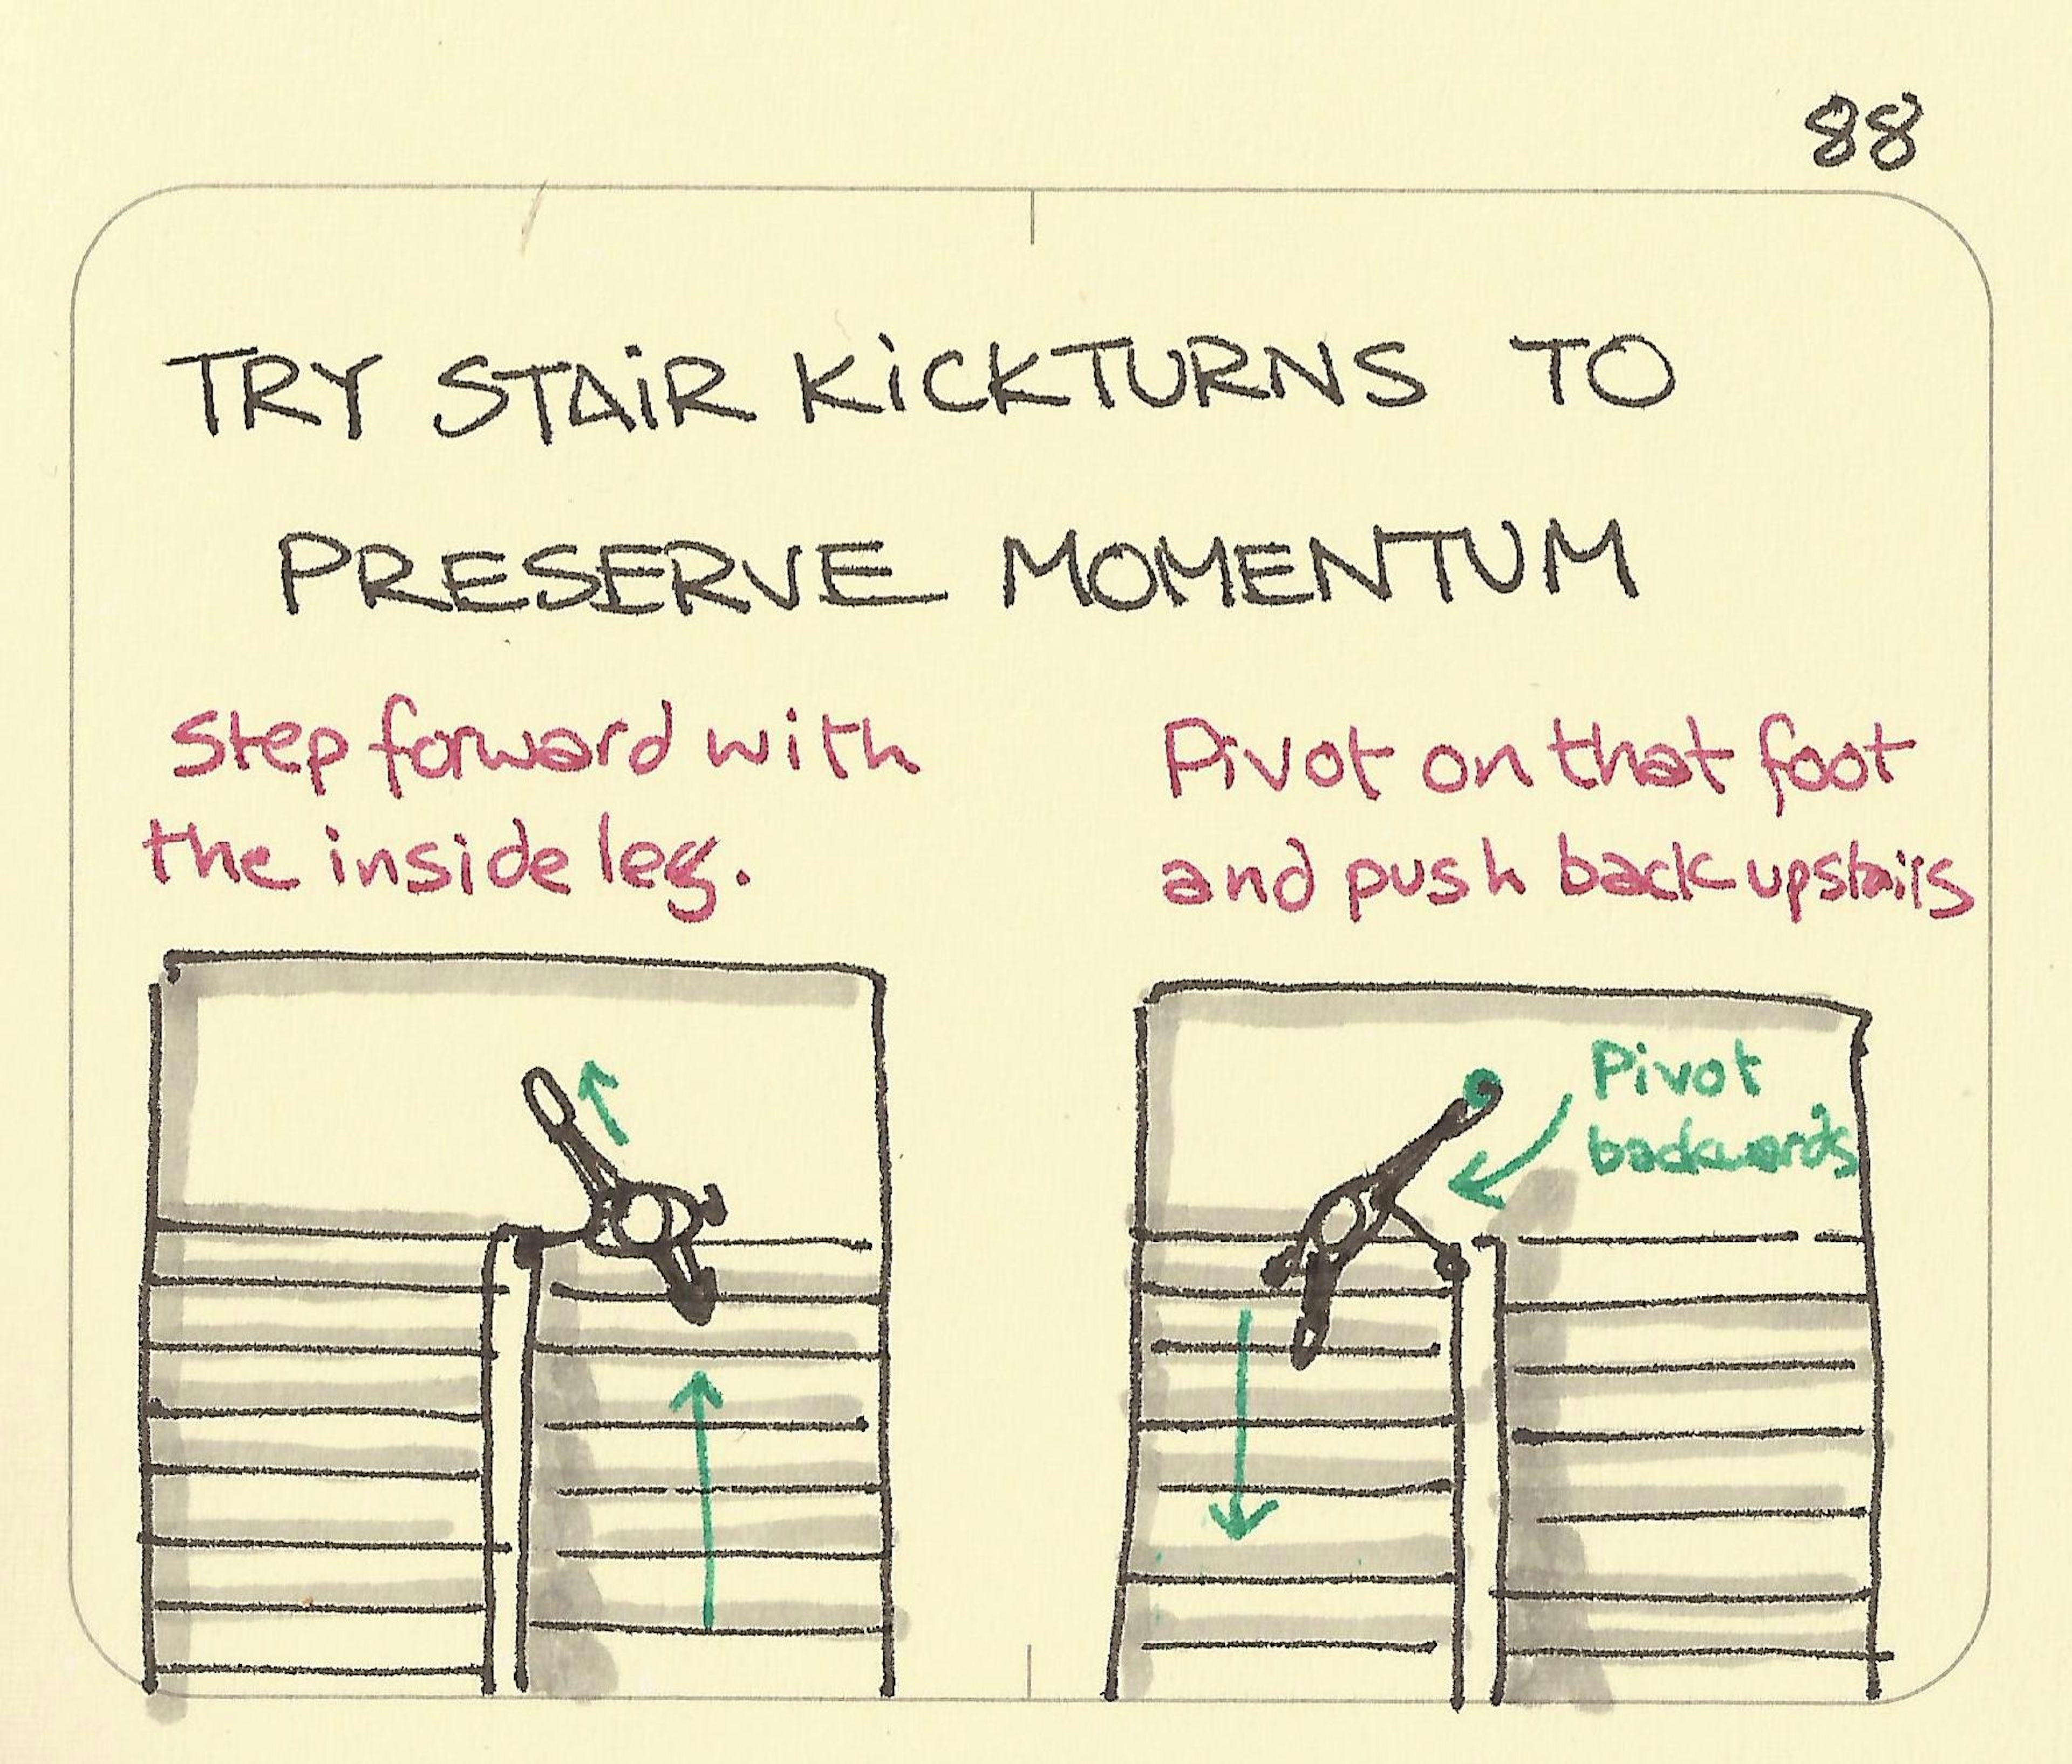 Try stair kickturns to preserve momentum - Sketchplanations